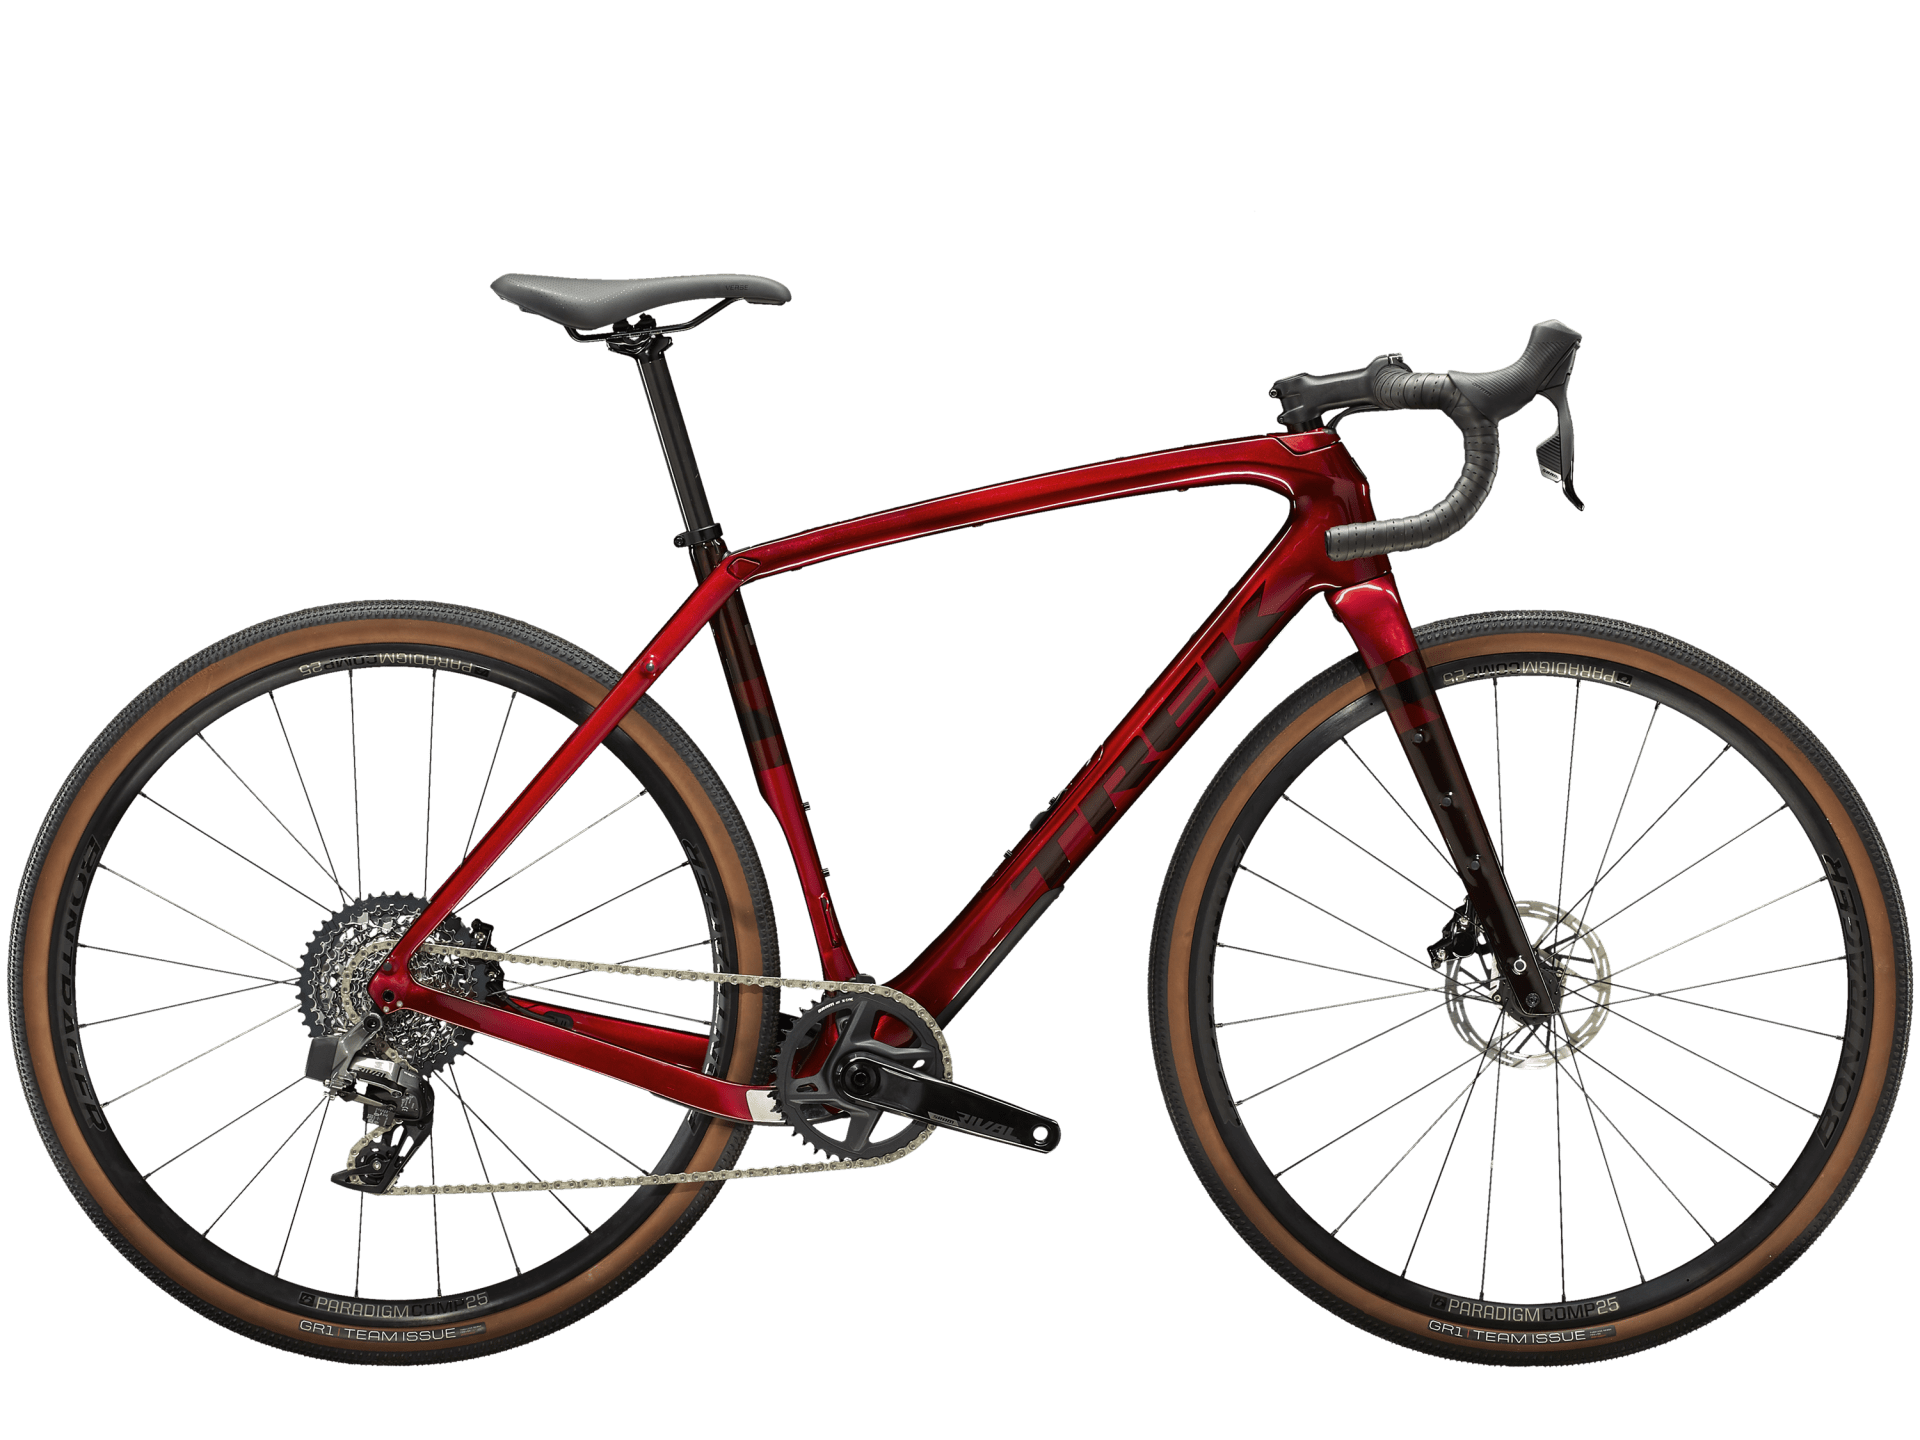 <a href="https://cycles-clement.be/product/checkpoint-sl-6-etap-54-crimson-carbon-red-smoke/">CHECKPOINT SL 6 ETAP 54 CRIMSON/CARBON RED SMOKE</a>